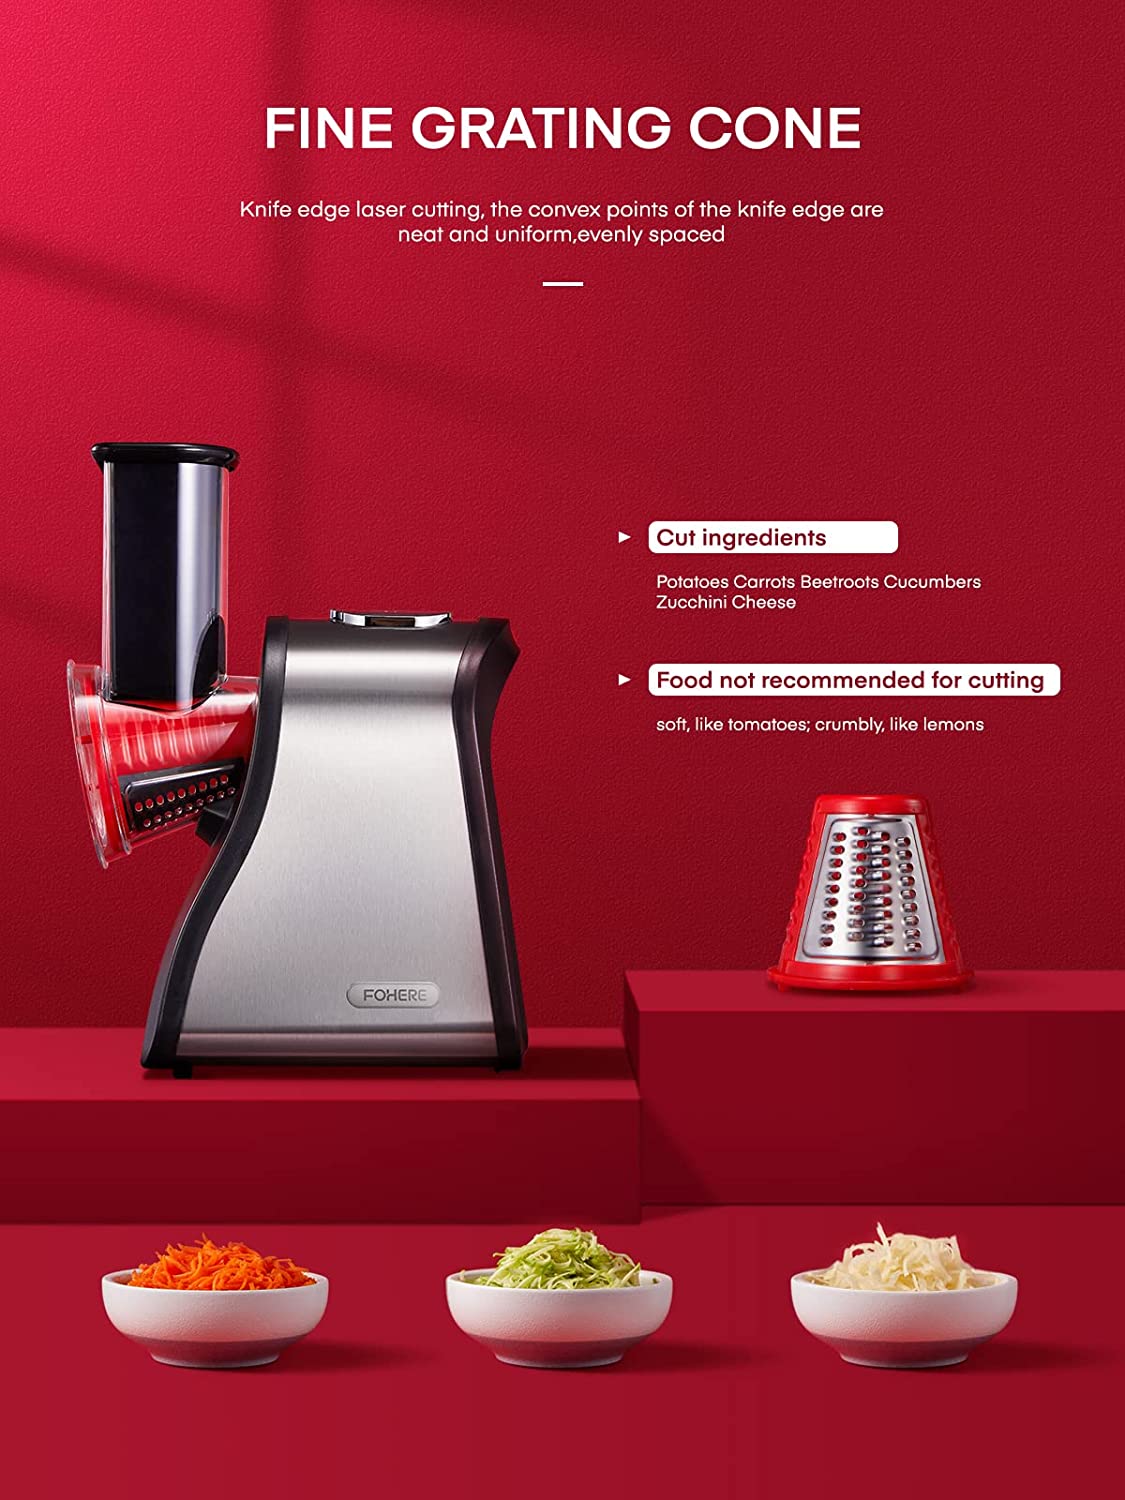 fine grating cone, FOHERE Electric Cheese Grater Shredder, Electric Vegetable Slicer Professional Salad Shooter for Home Kitchen Use, One-Touch Easy Control, Salad Maker Machine for Vegetables, Cheeses, BPA-Free, Red